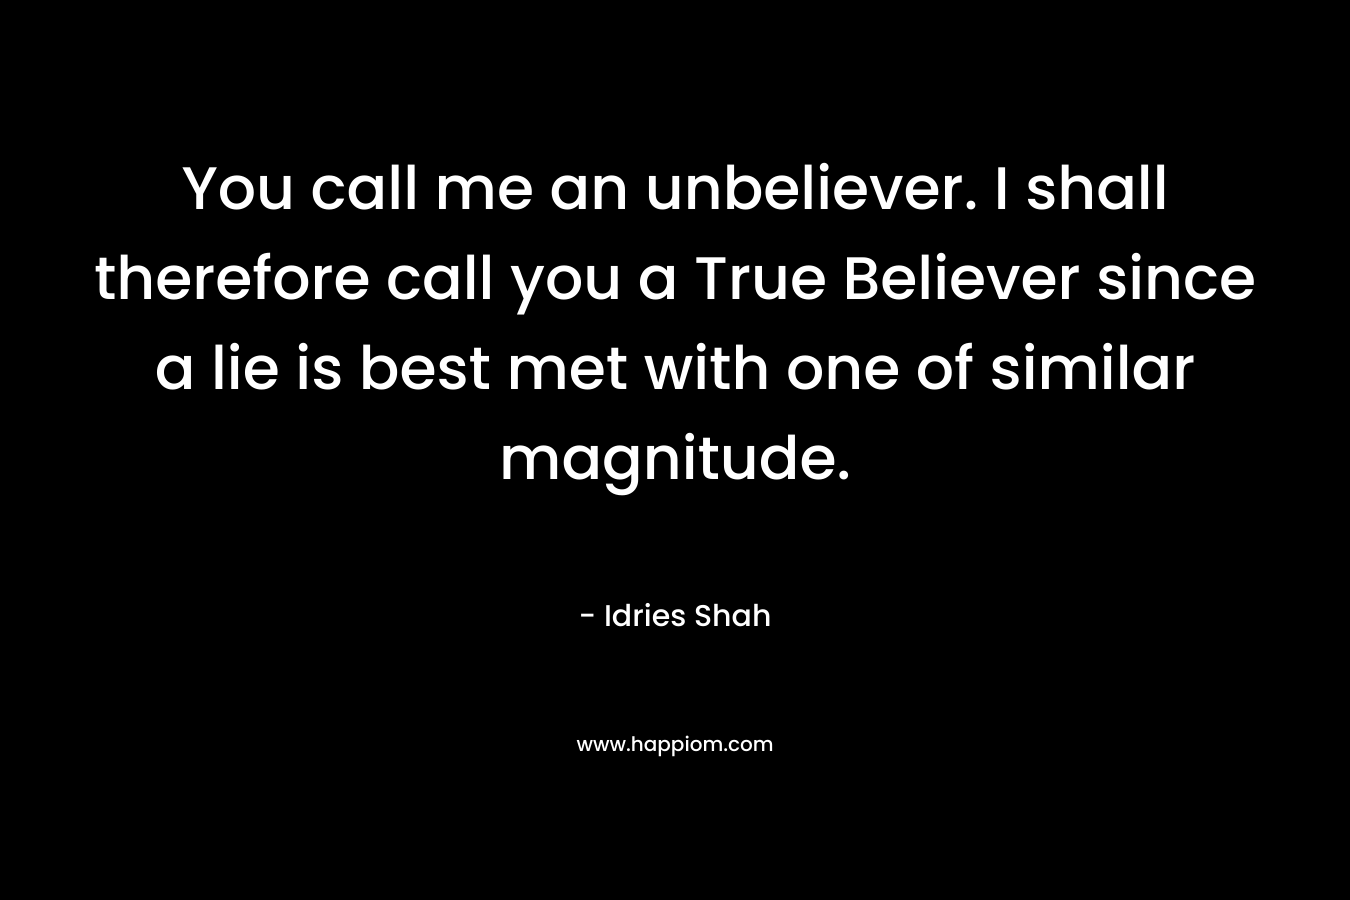 You call me an unbeliever. I shall therefore call you a True Believer since a lie is best met with one of similar magnitude. – Idries Shah